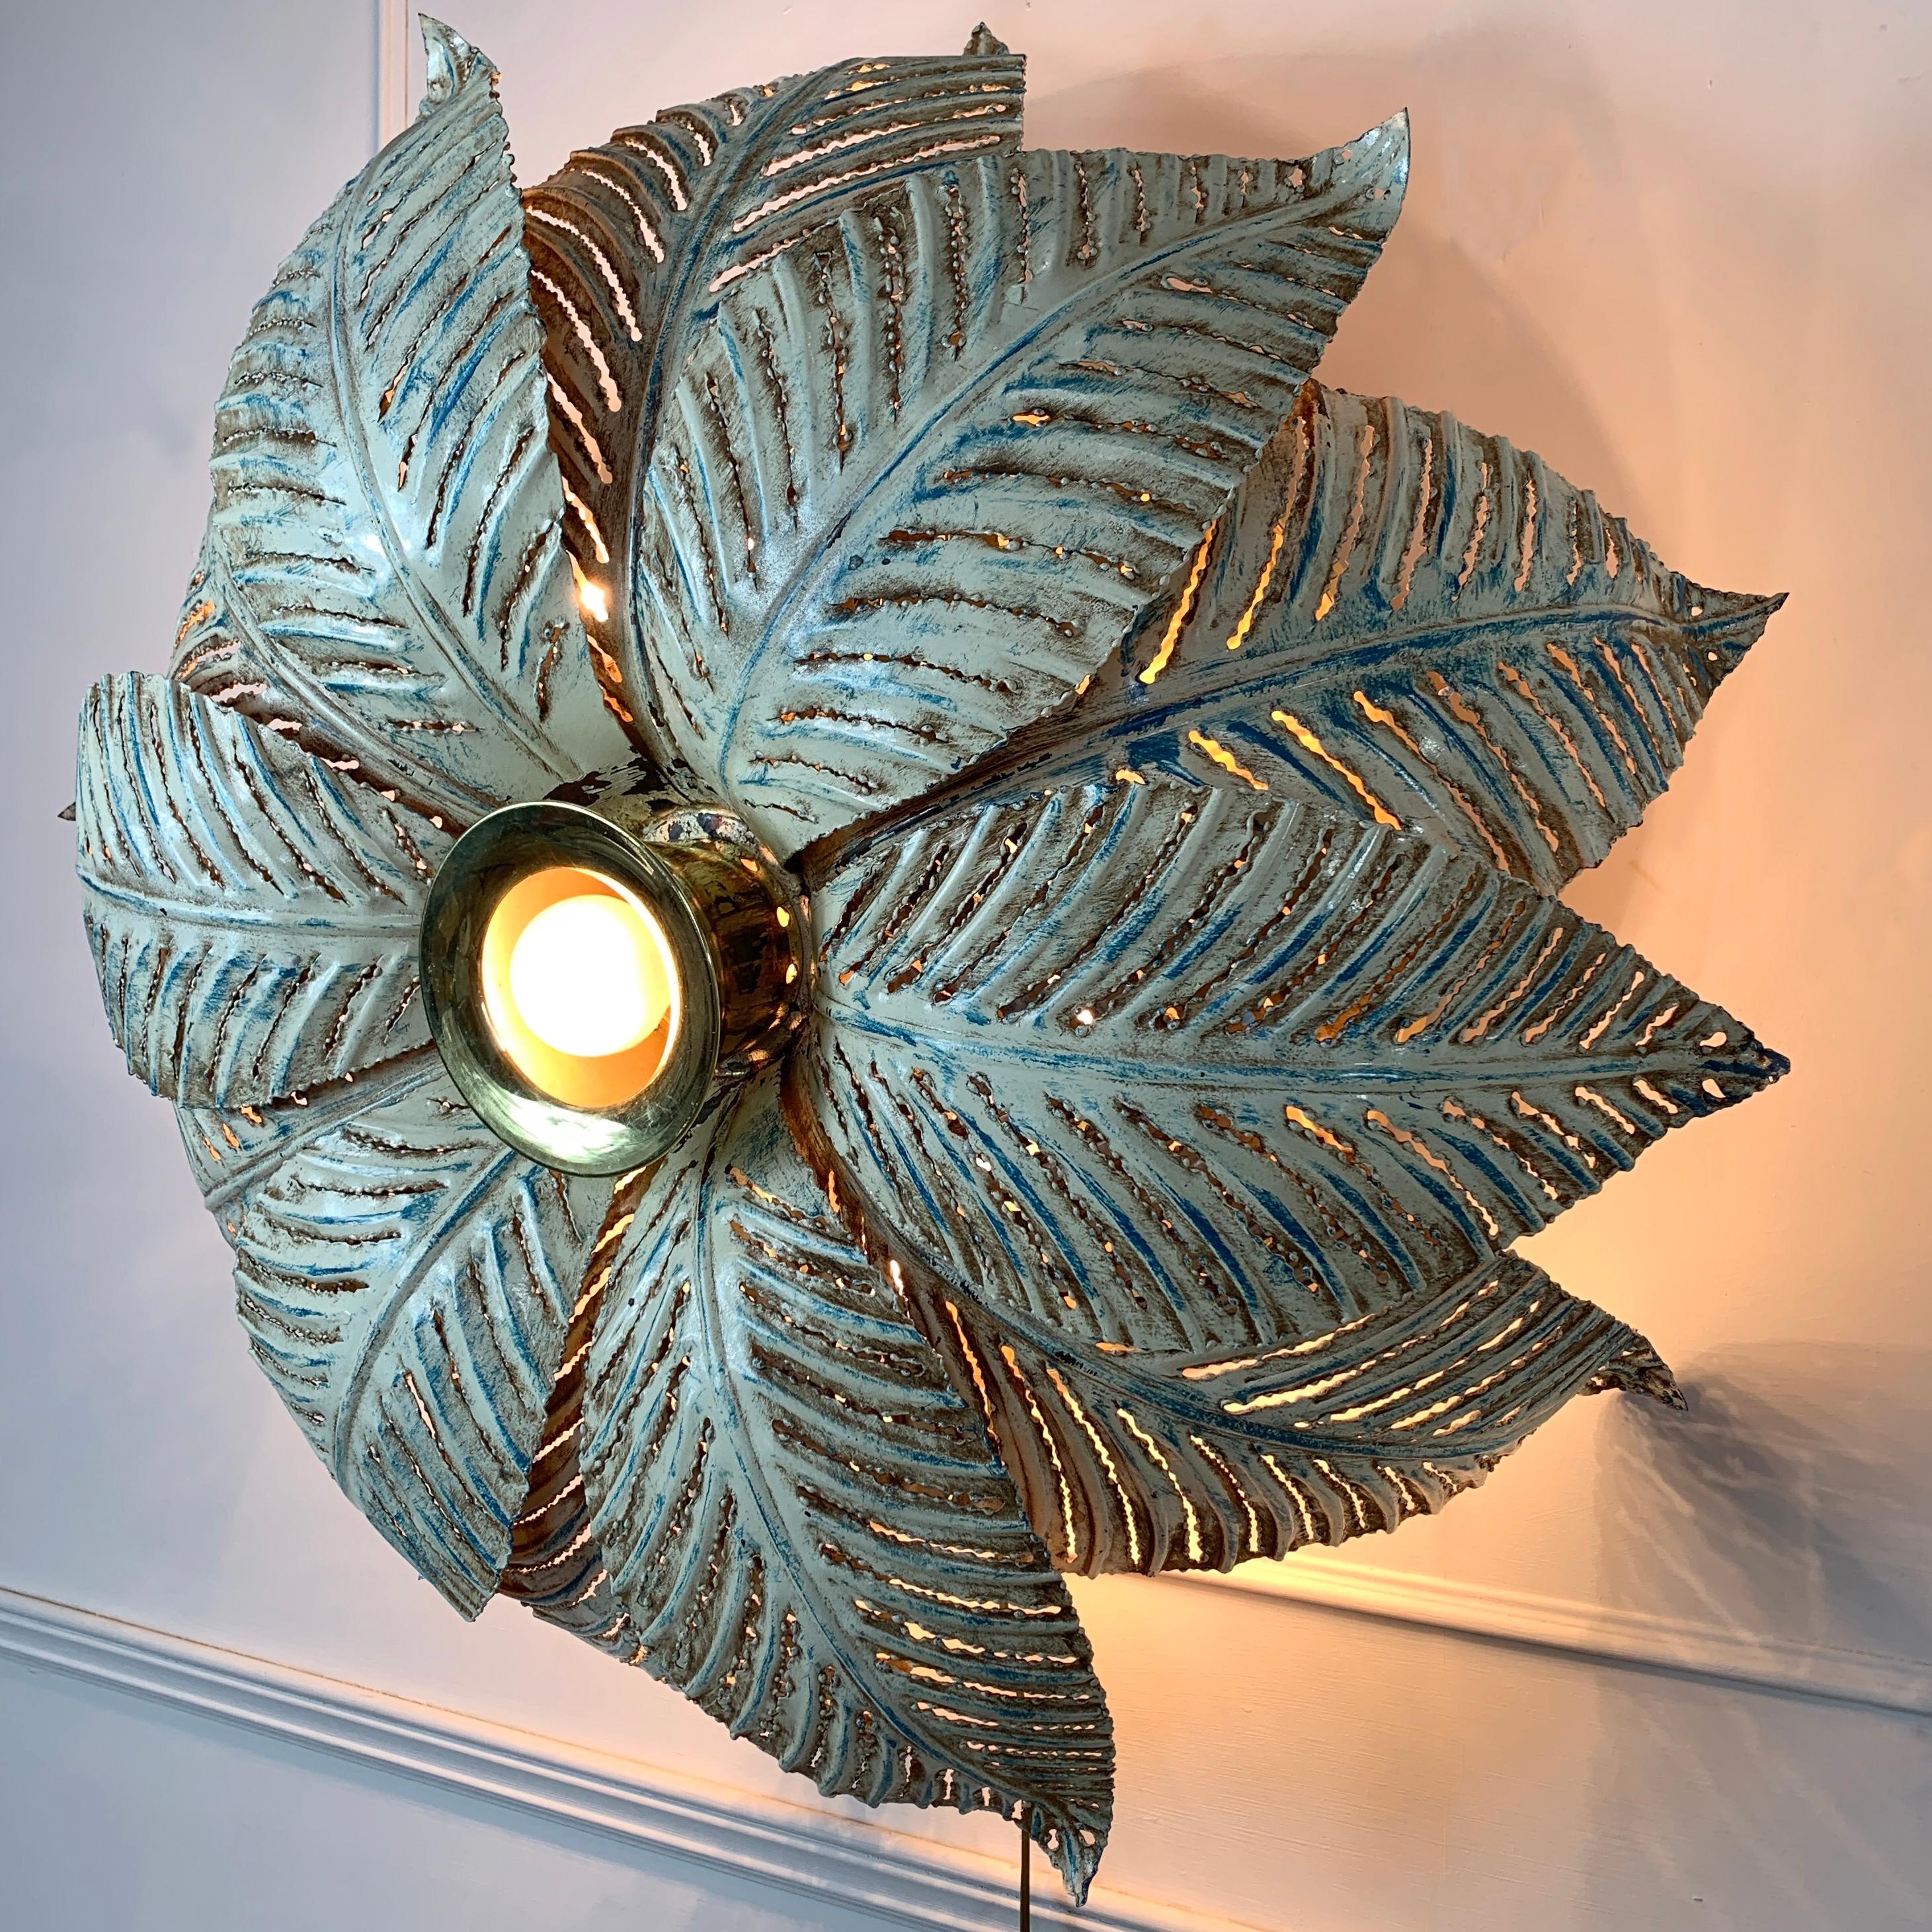 An exceptional Banci Firenze ceiling flush mounted light, dating from the 1980s. This is an extremely rare light from the iconic Banci lighting company, of huge proportions, enormous individual palm leaves sit over 12 E14 bulb holders, with one main